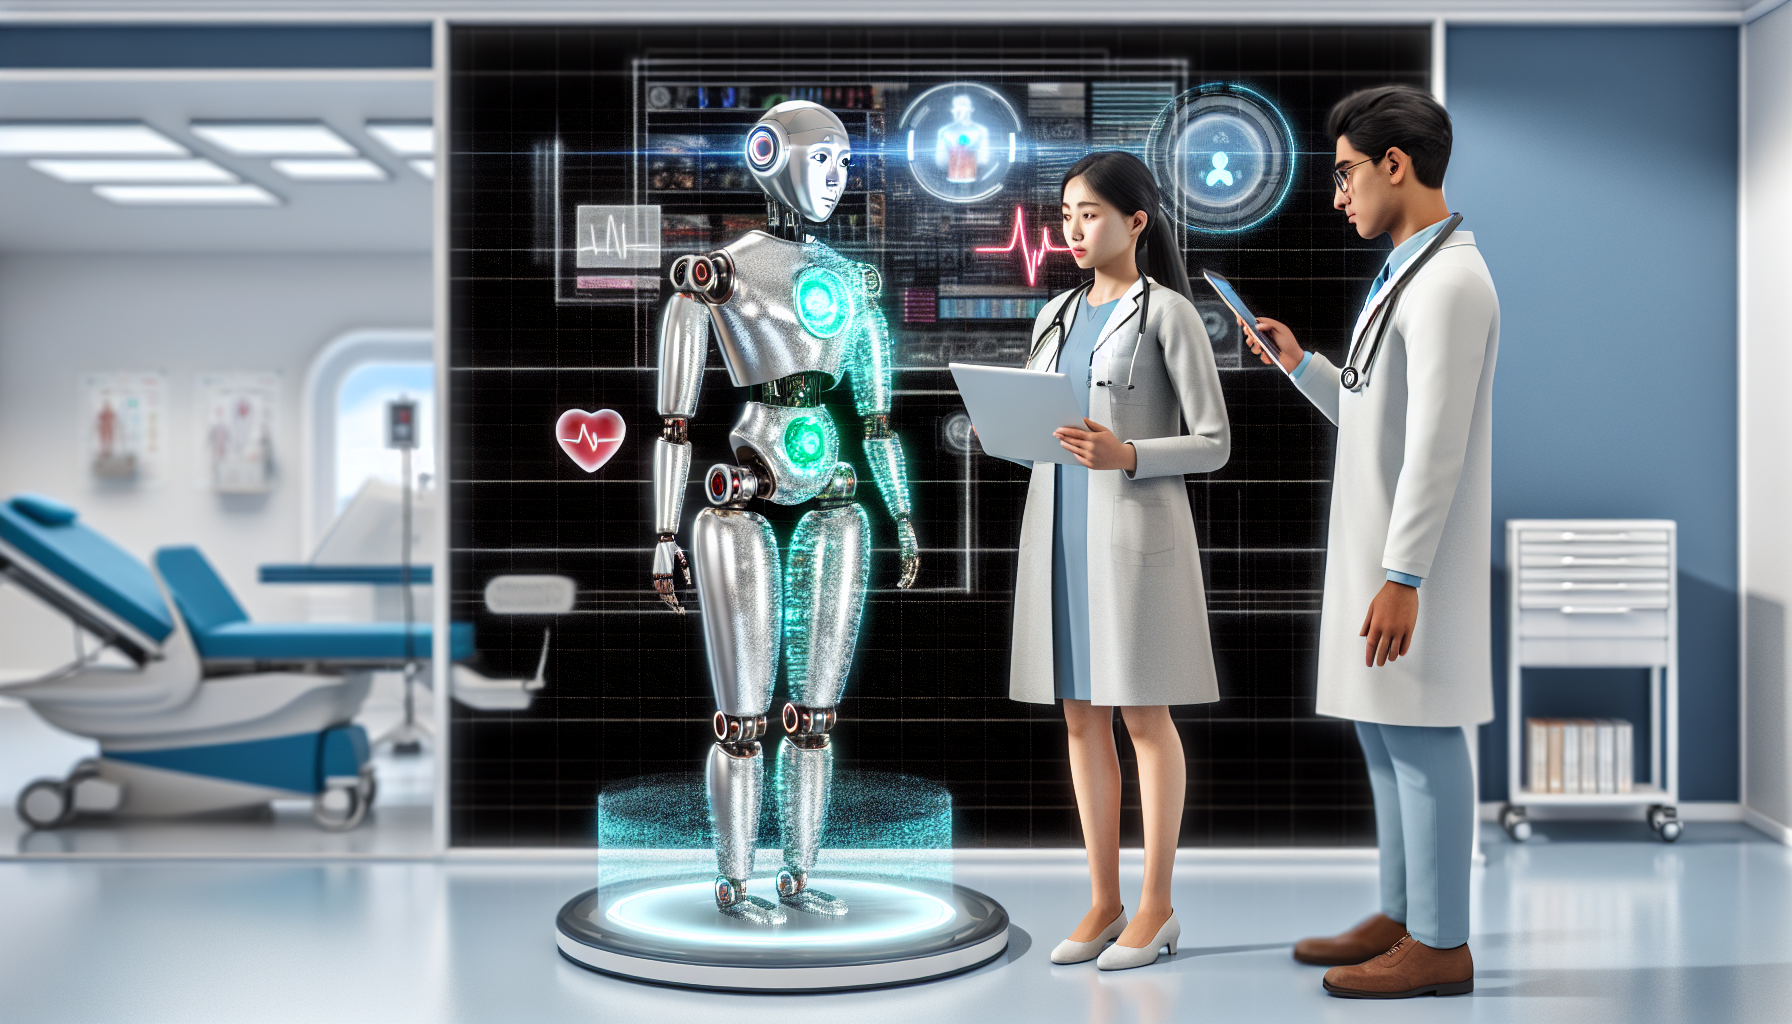 Artificial Intelligence in a medical setting